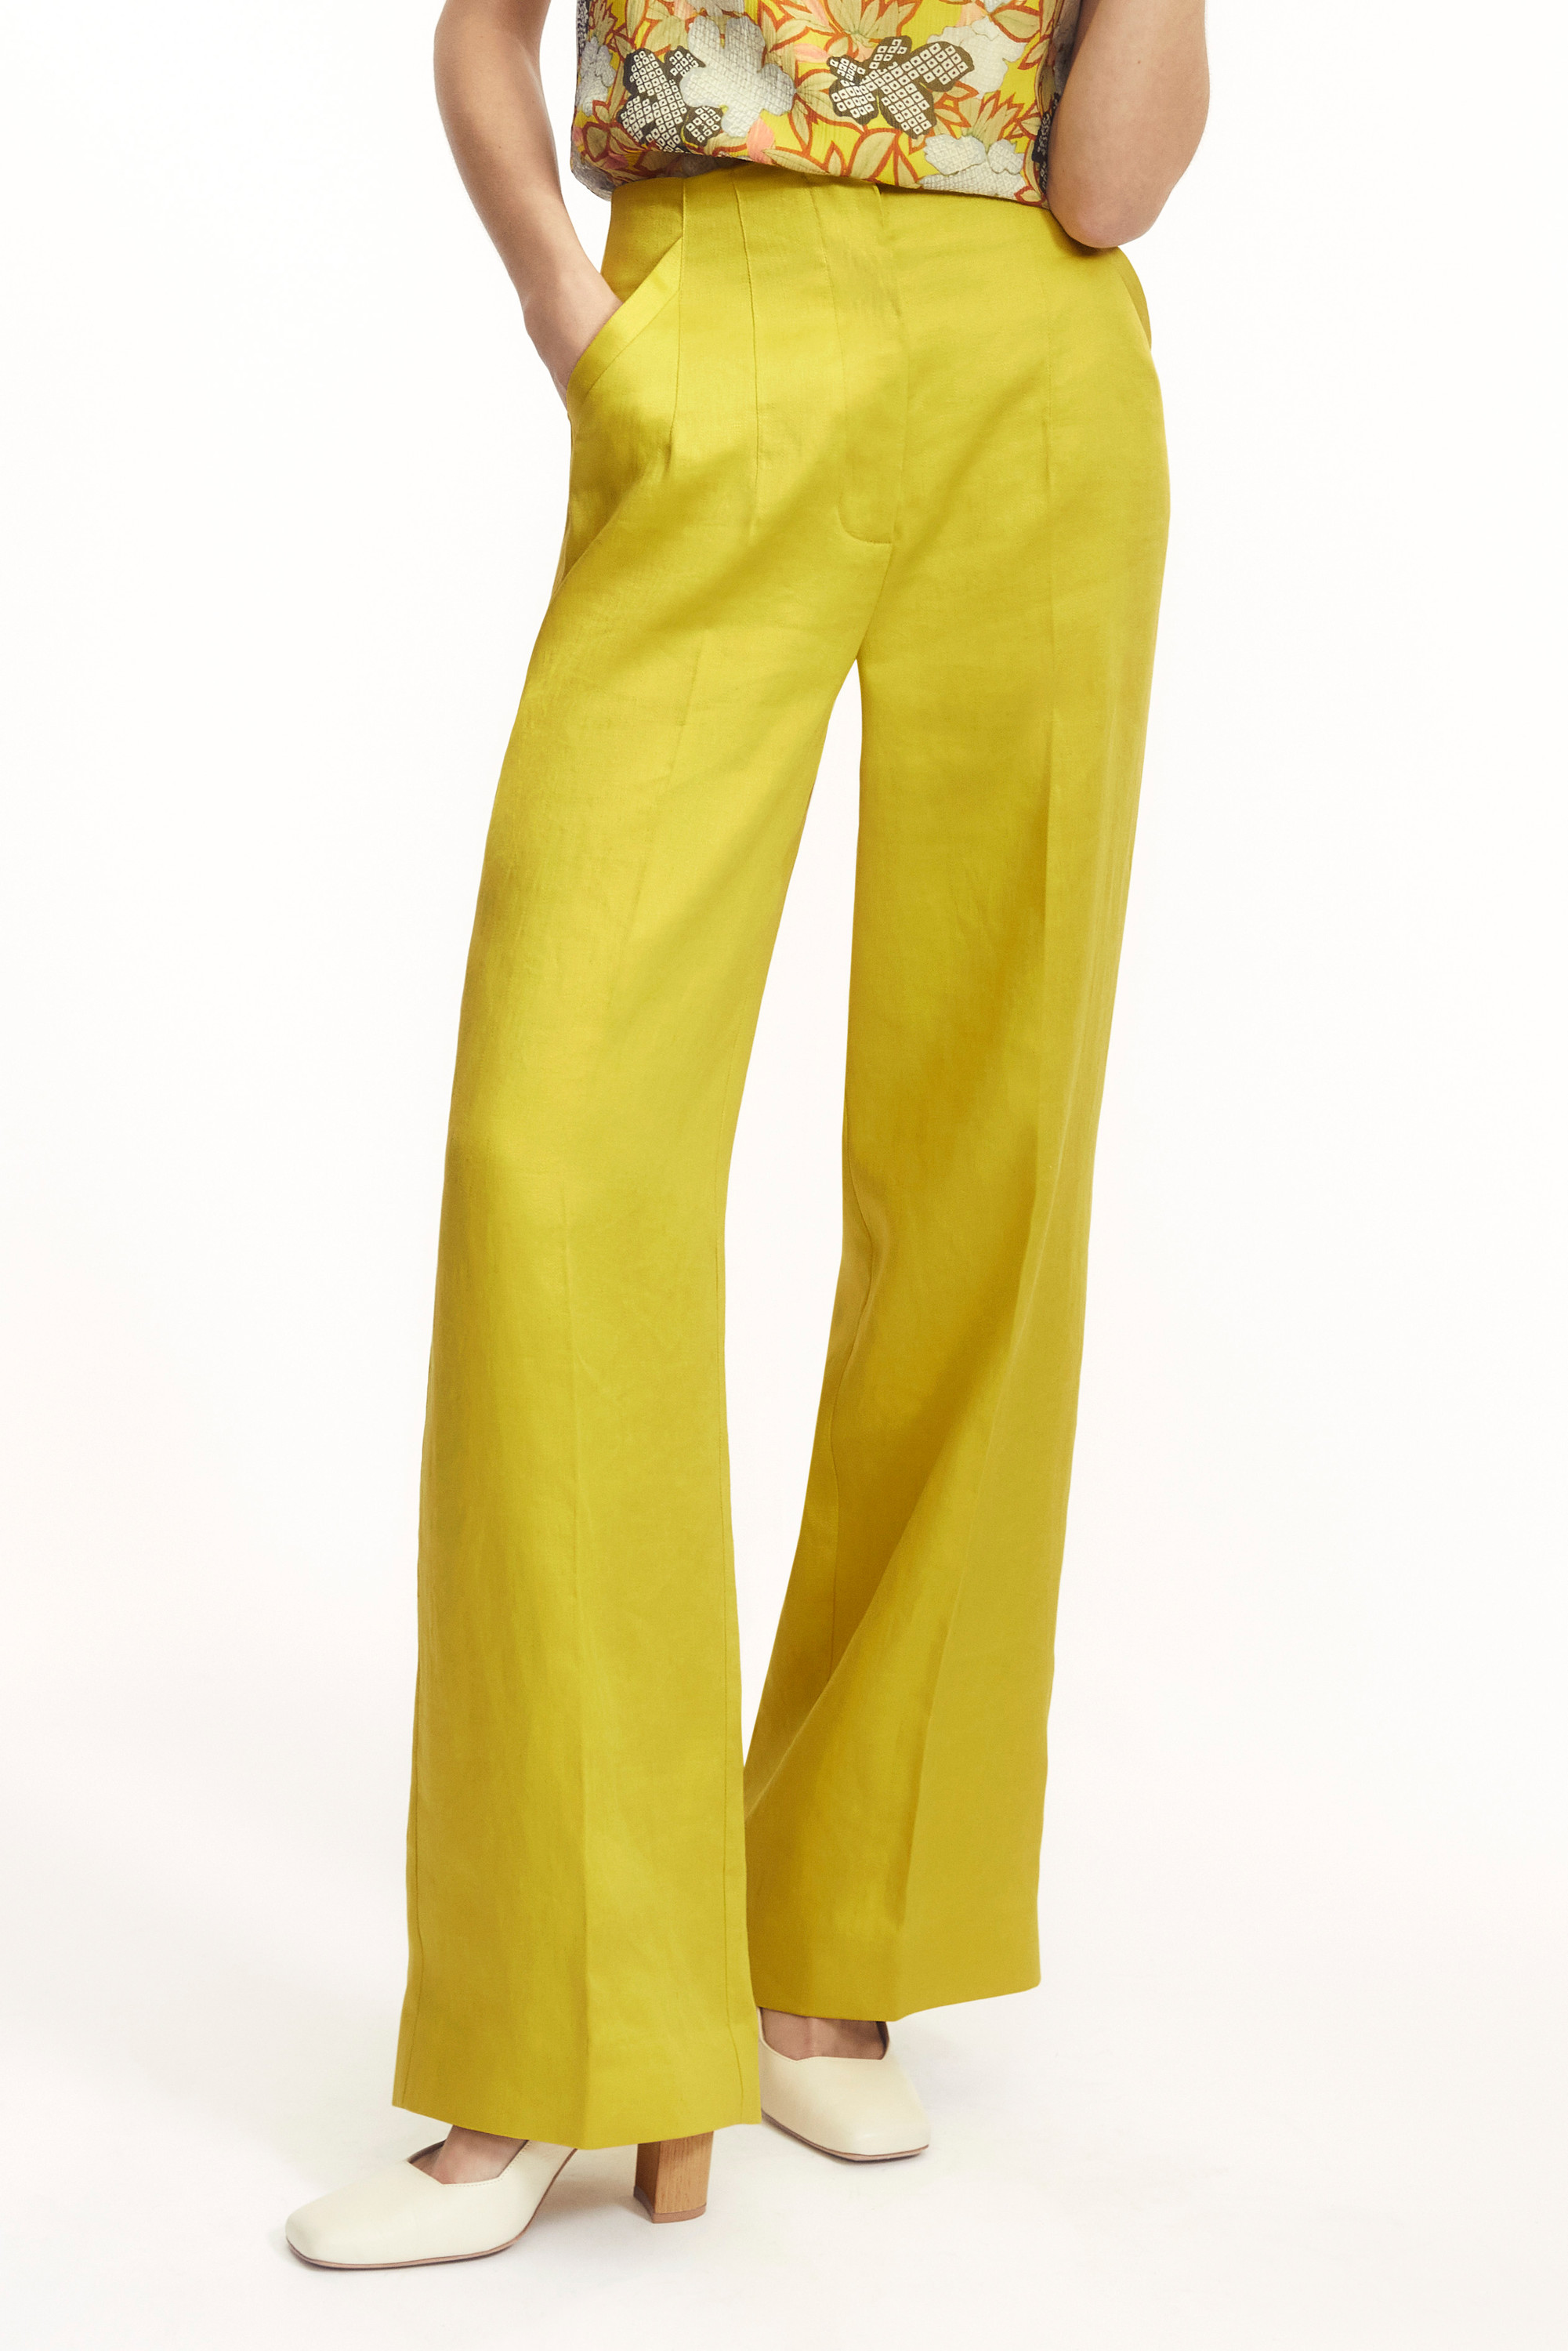 Ellerdale Trousers Summer Yellow Linen - Welcome to the Fold LTD